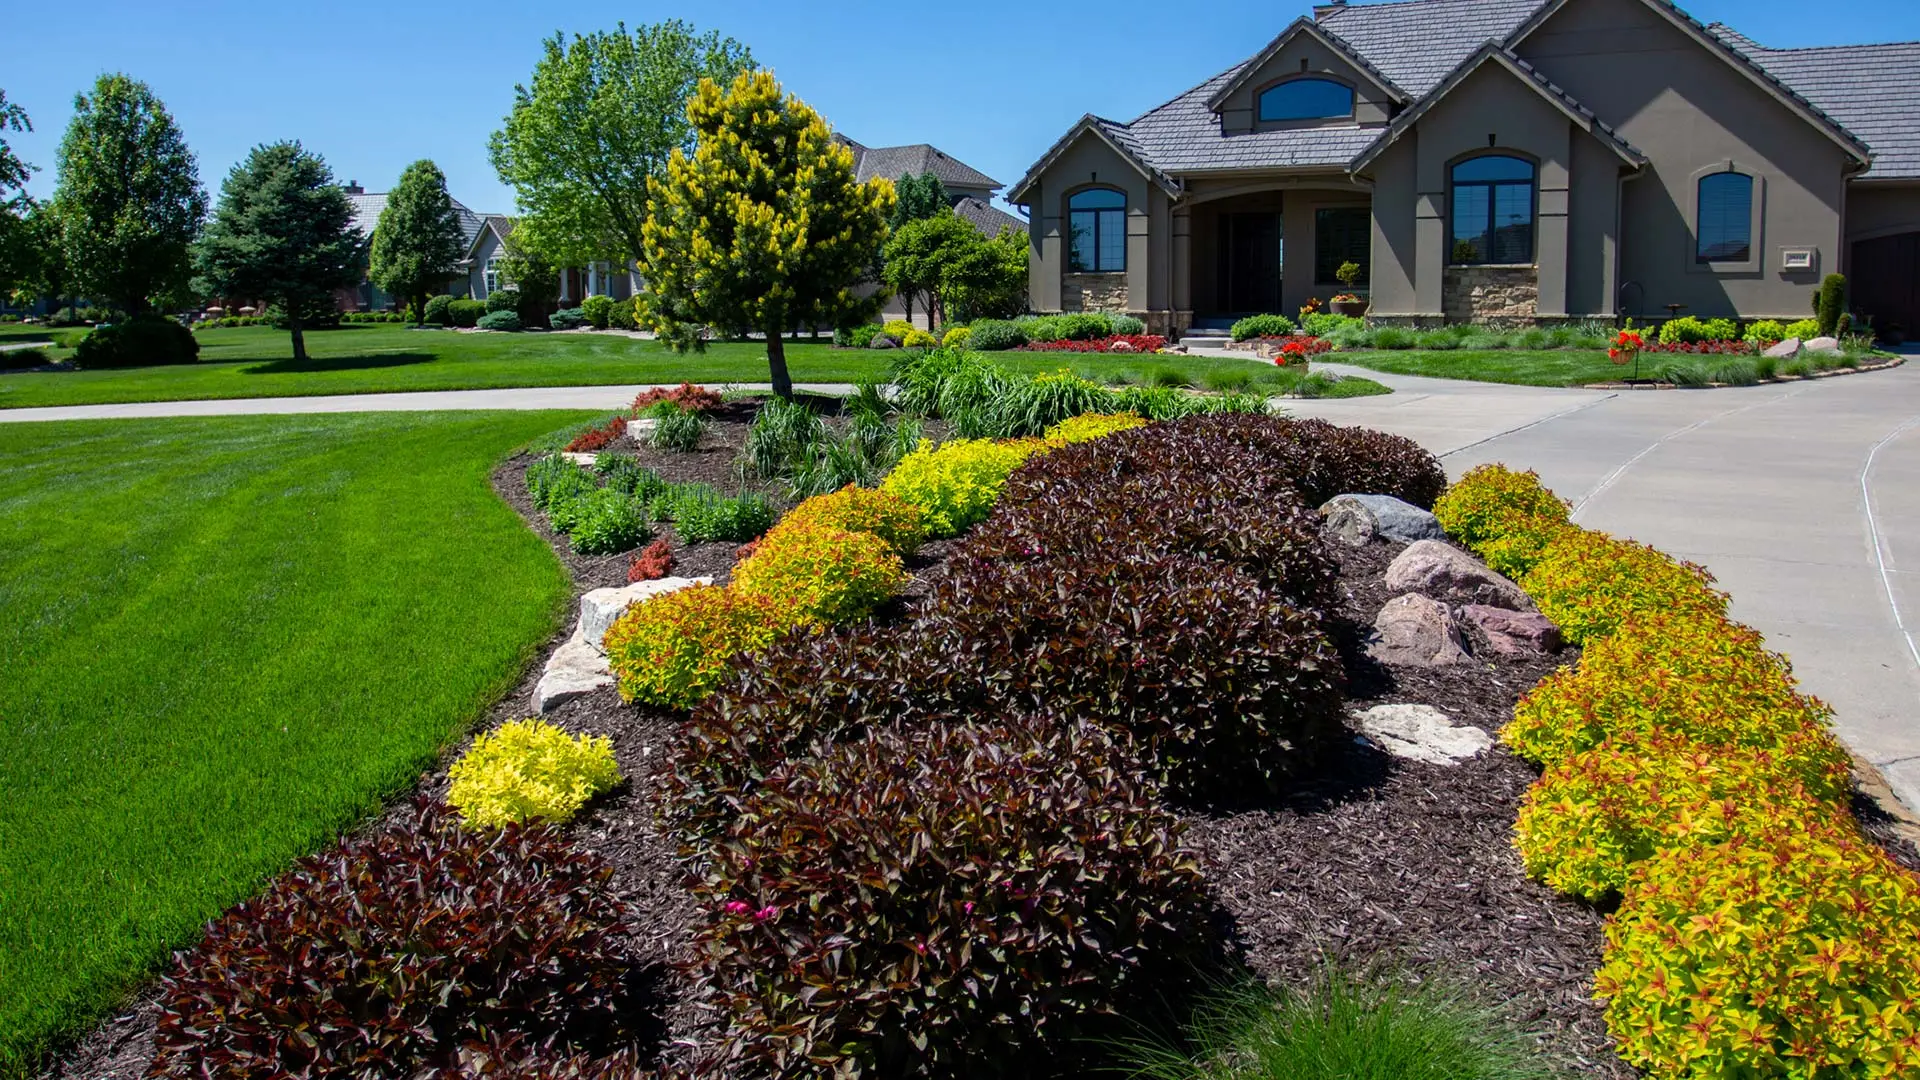 A large landscape bed with colorful bushes and trees near a home in Valley, NE.